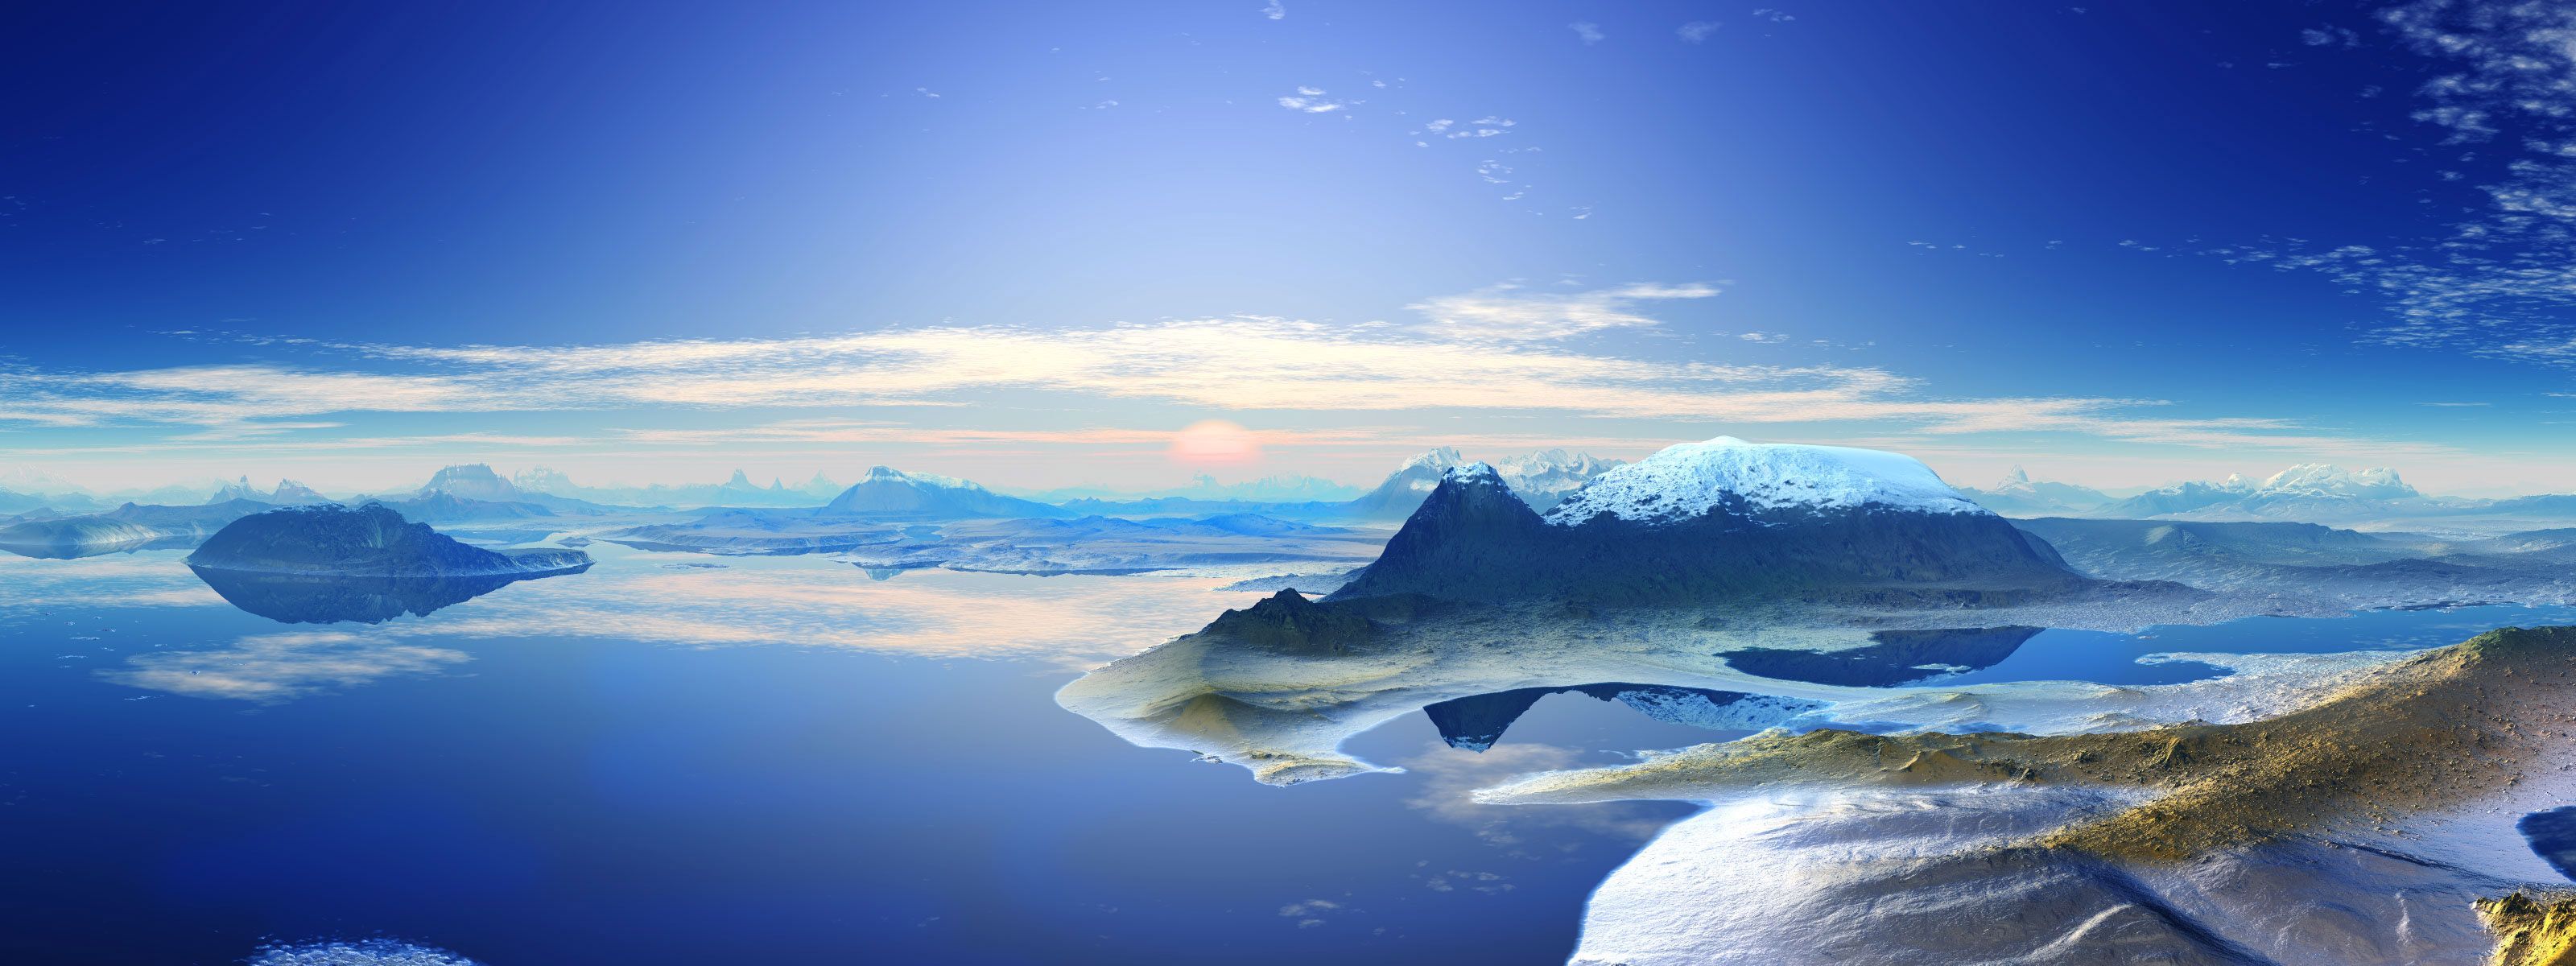 3D Panoramic Landscape Wallpapers | HD Wallpapers